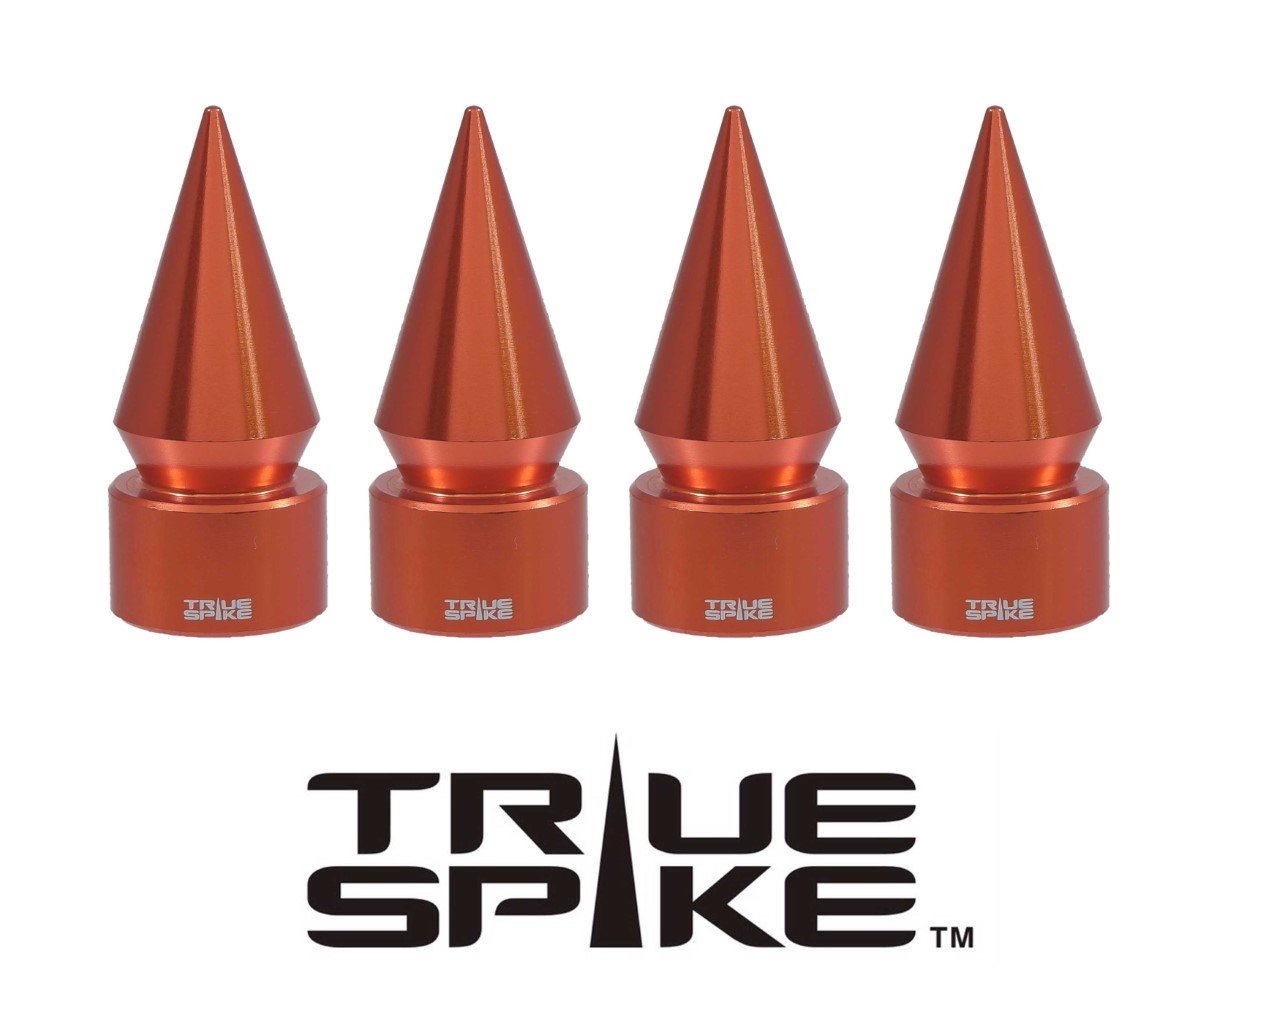 TPMS (TIRE PRESSURE MONITORING SYSTEM) SPIKE BILLET ALUMINUM AIR TIRE RIM WHEEL VALVE STEM CAP COVER KIT AVAILABLE IN MANY COLORS // PART # WVC003